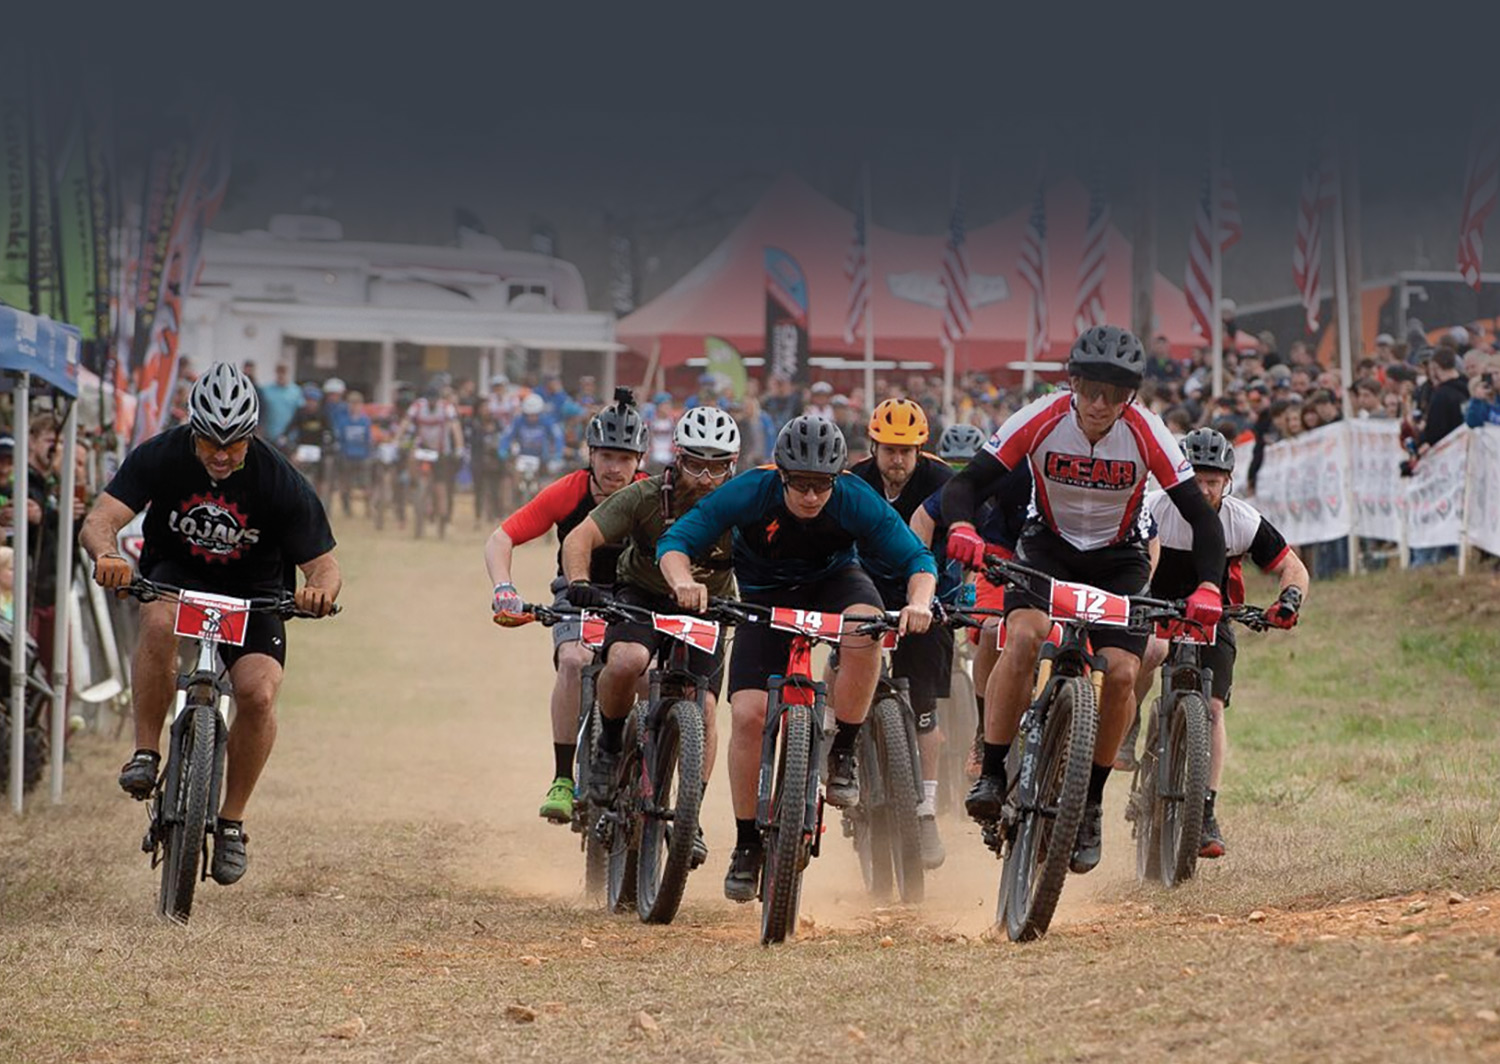 T he General GNCC in Washington, Georgia, hosted the first round (of eight) of the Specialized Turbo eMTB GNCC National Championship Series on March 16.